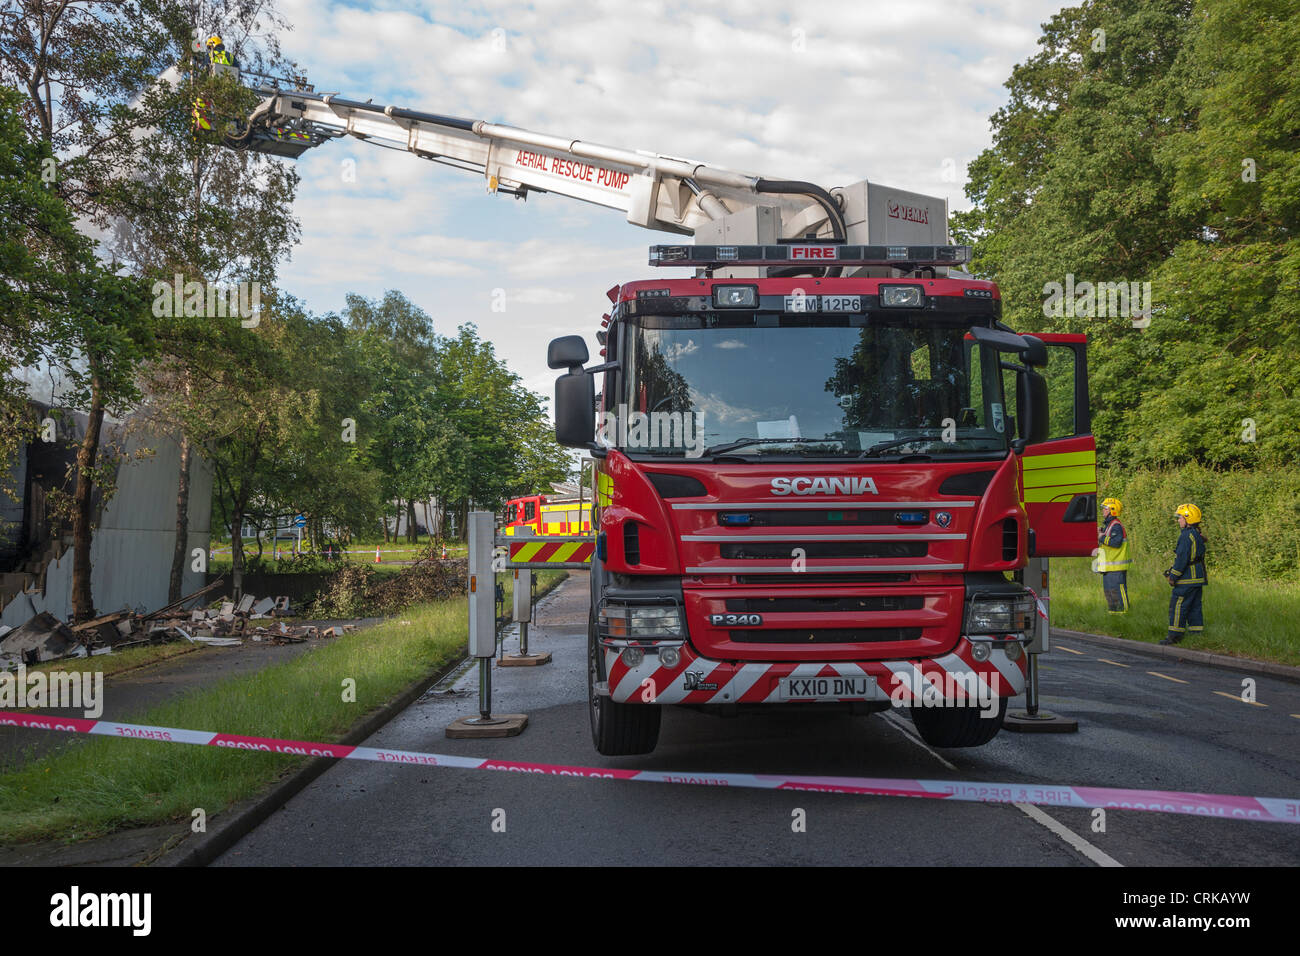 Aerial Rescue Pump High Resolution Stock Photography and Images - Alamy